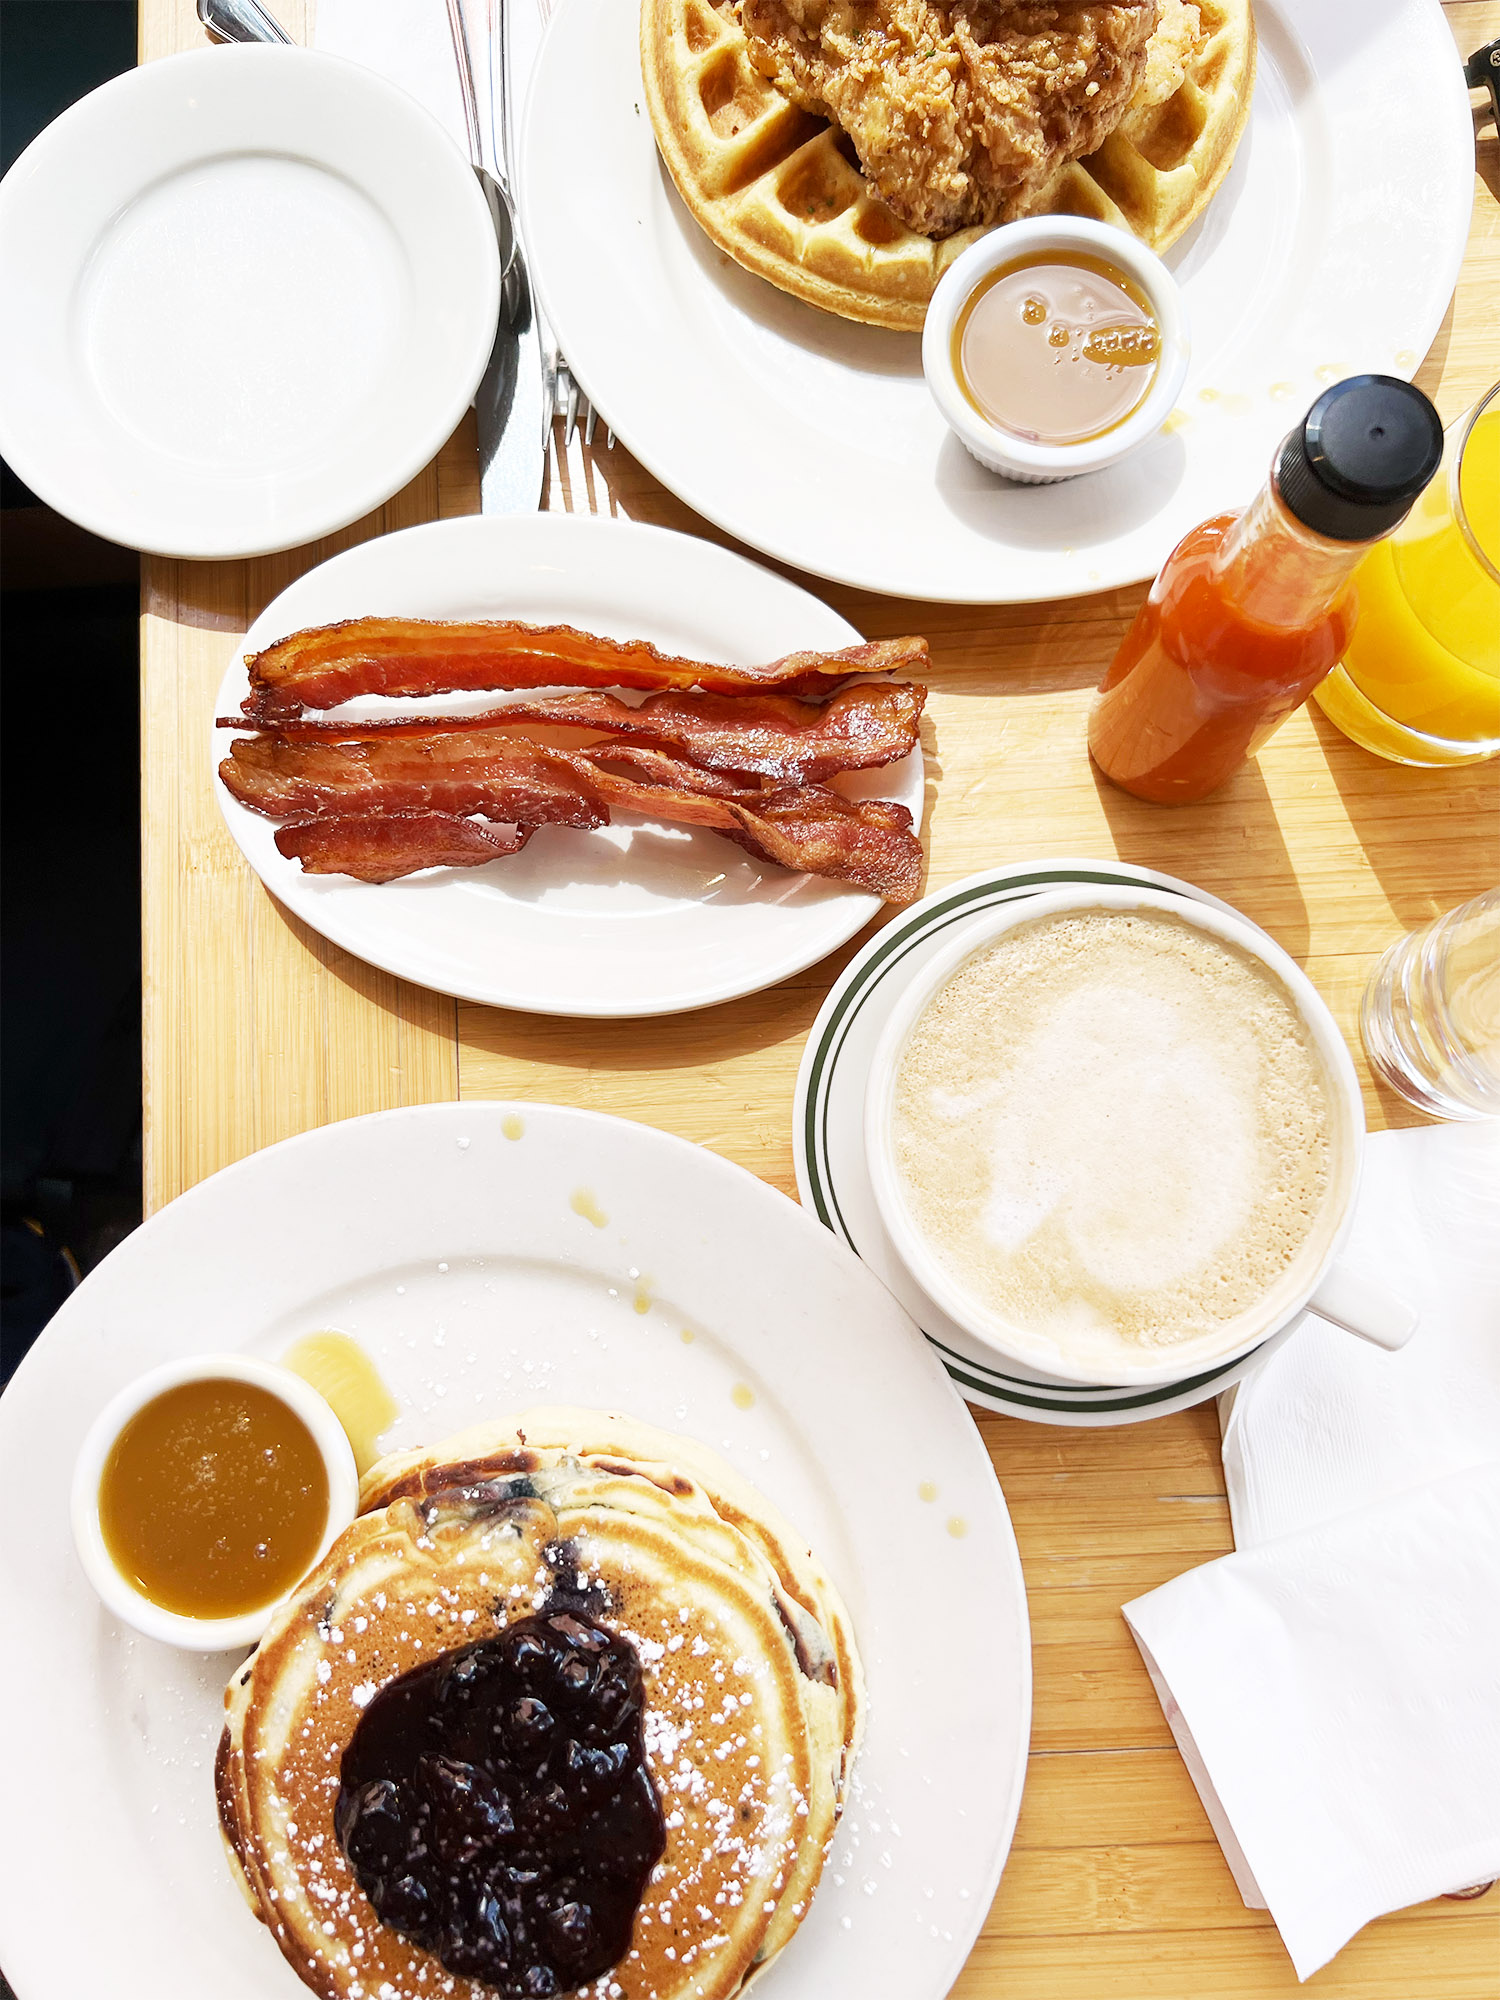 NYC: Brunch with Oluva at Clinton Street Baking Co.